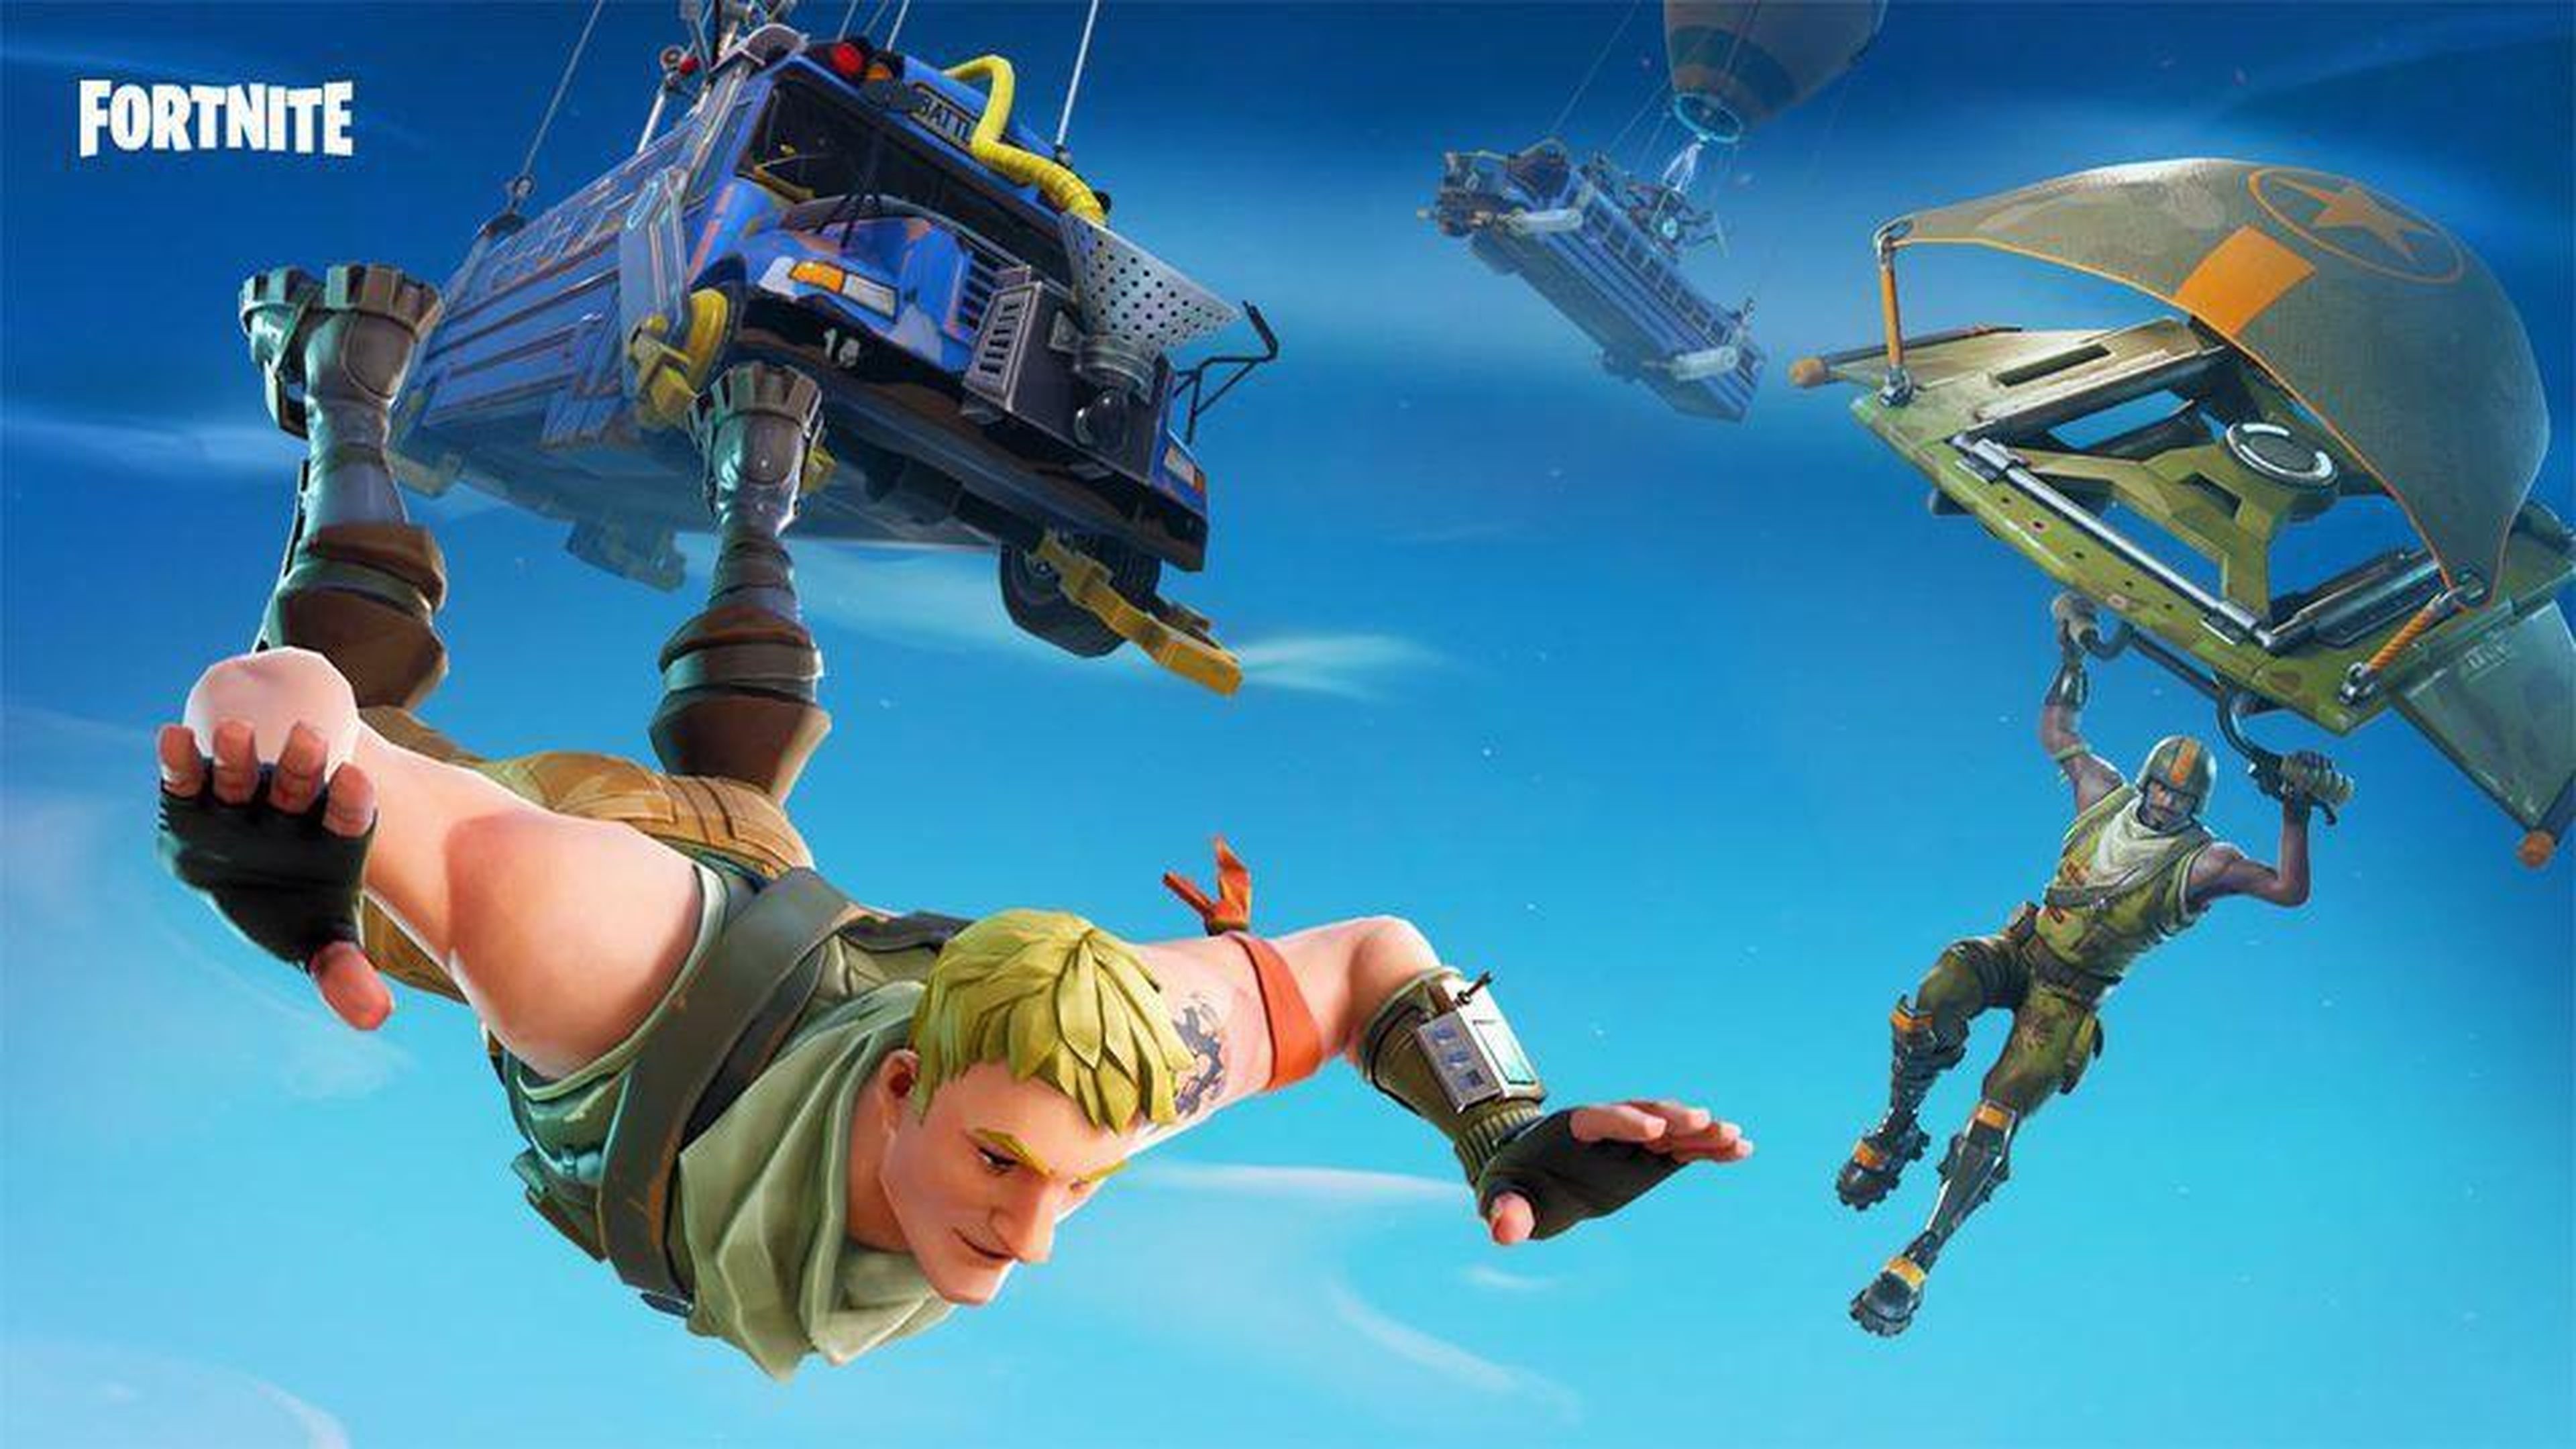 Xbox One and PlayStation 4 will now be competing full time in "Fortnite: Battle Royale."